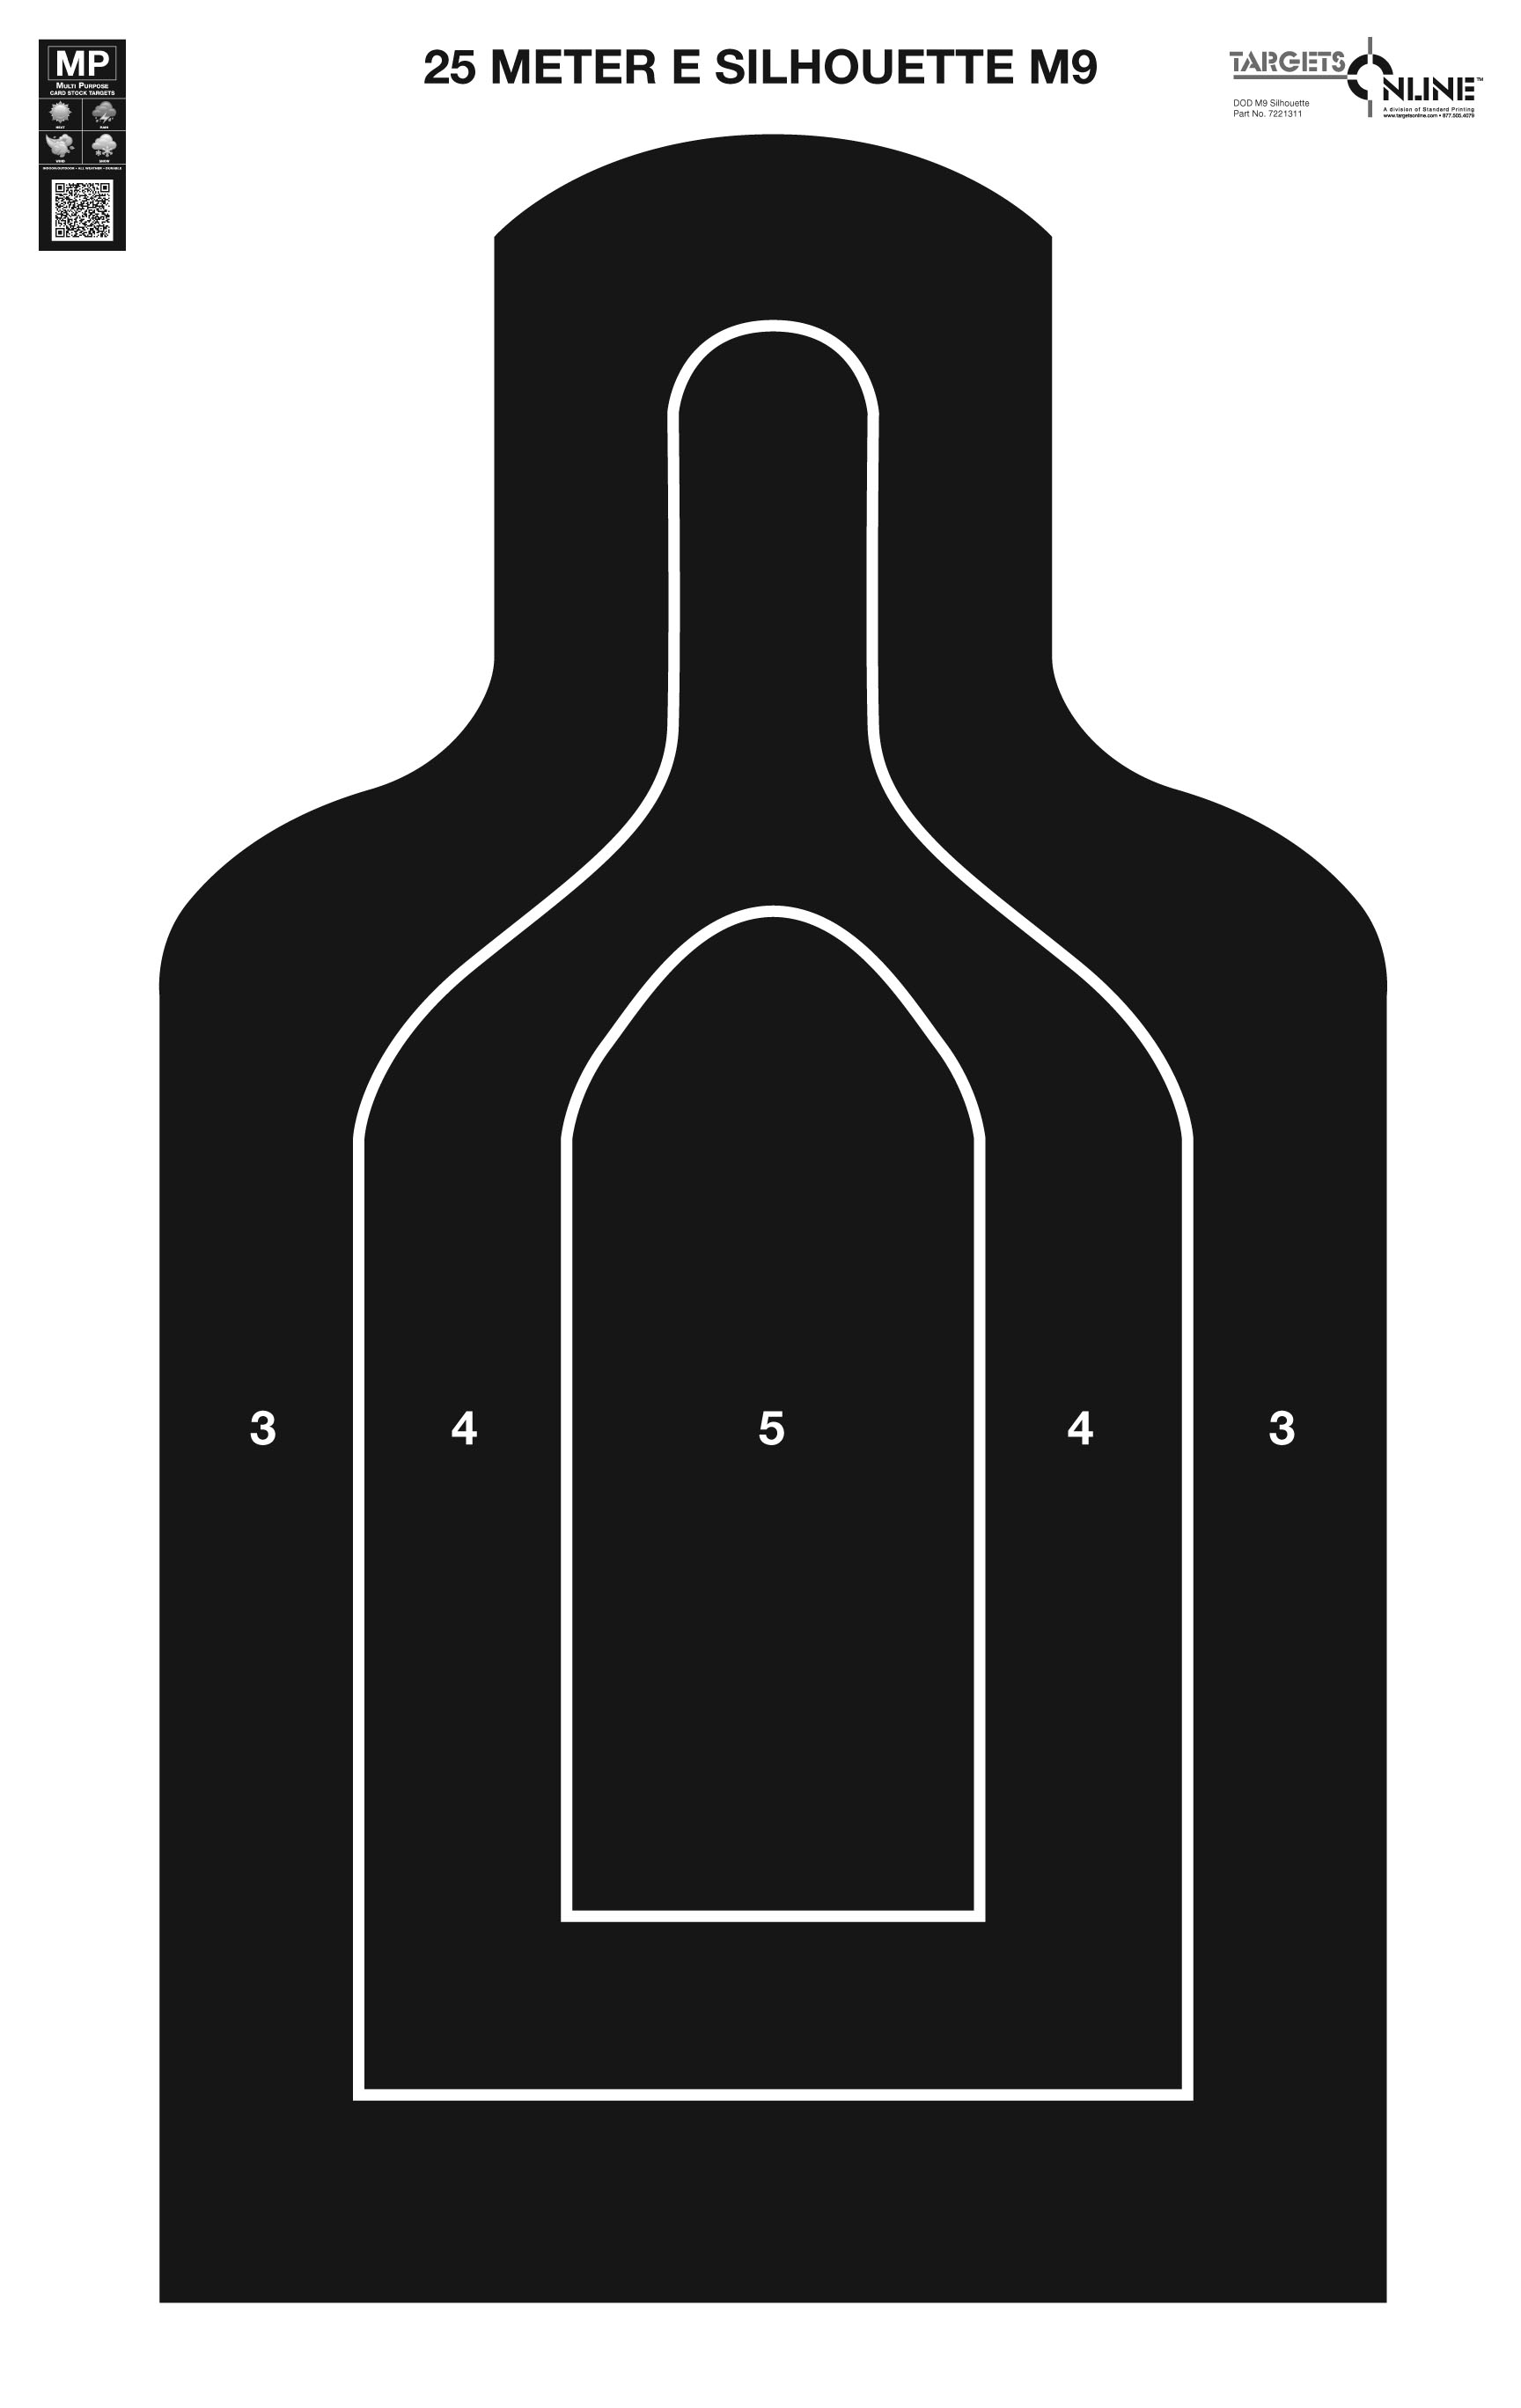 DOD M9 Silhouette 25 meter - Card Stock